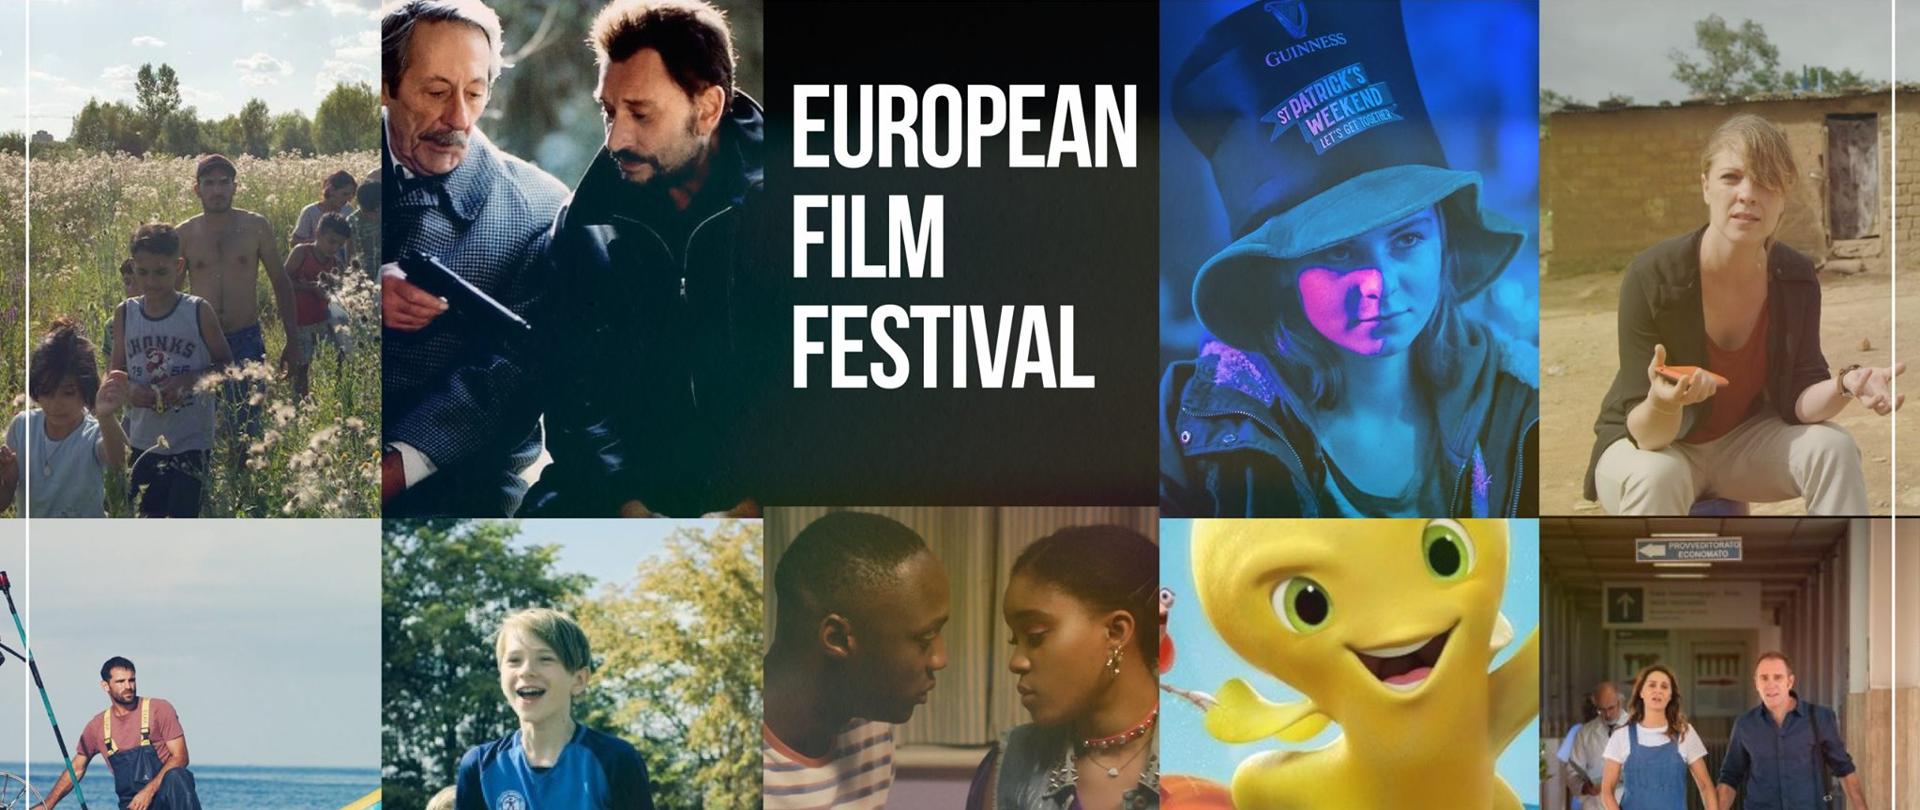 European Film Festival brought by EUNIC 